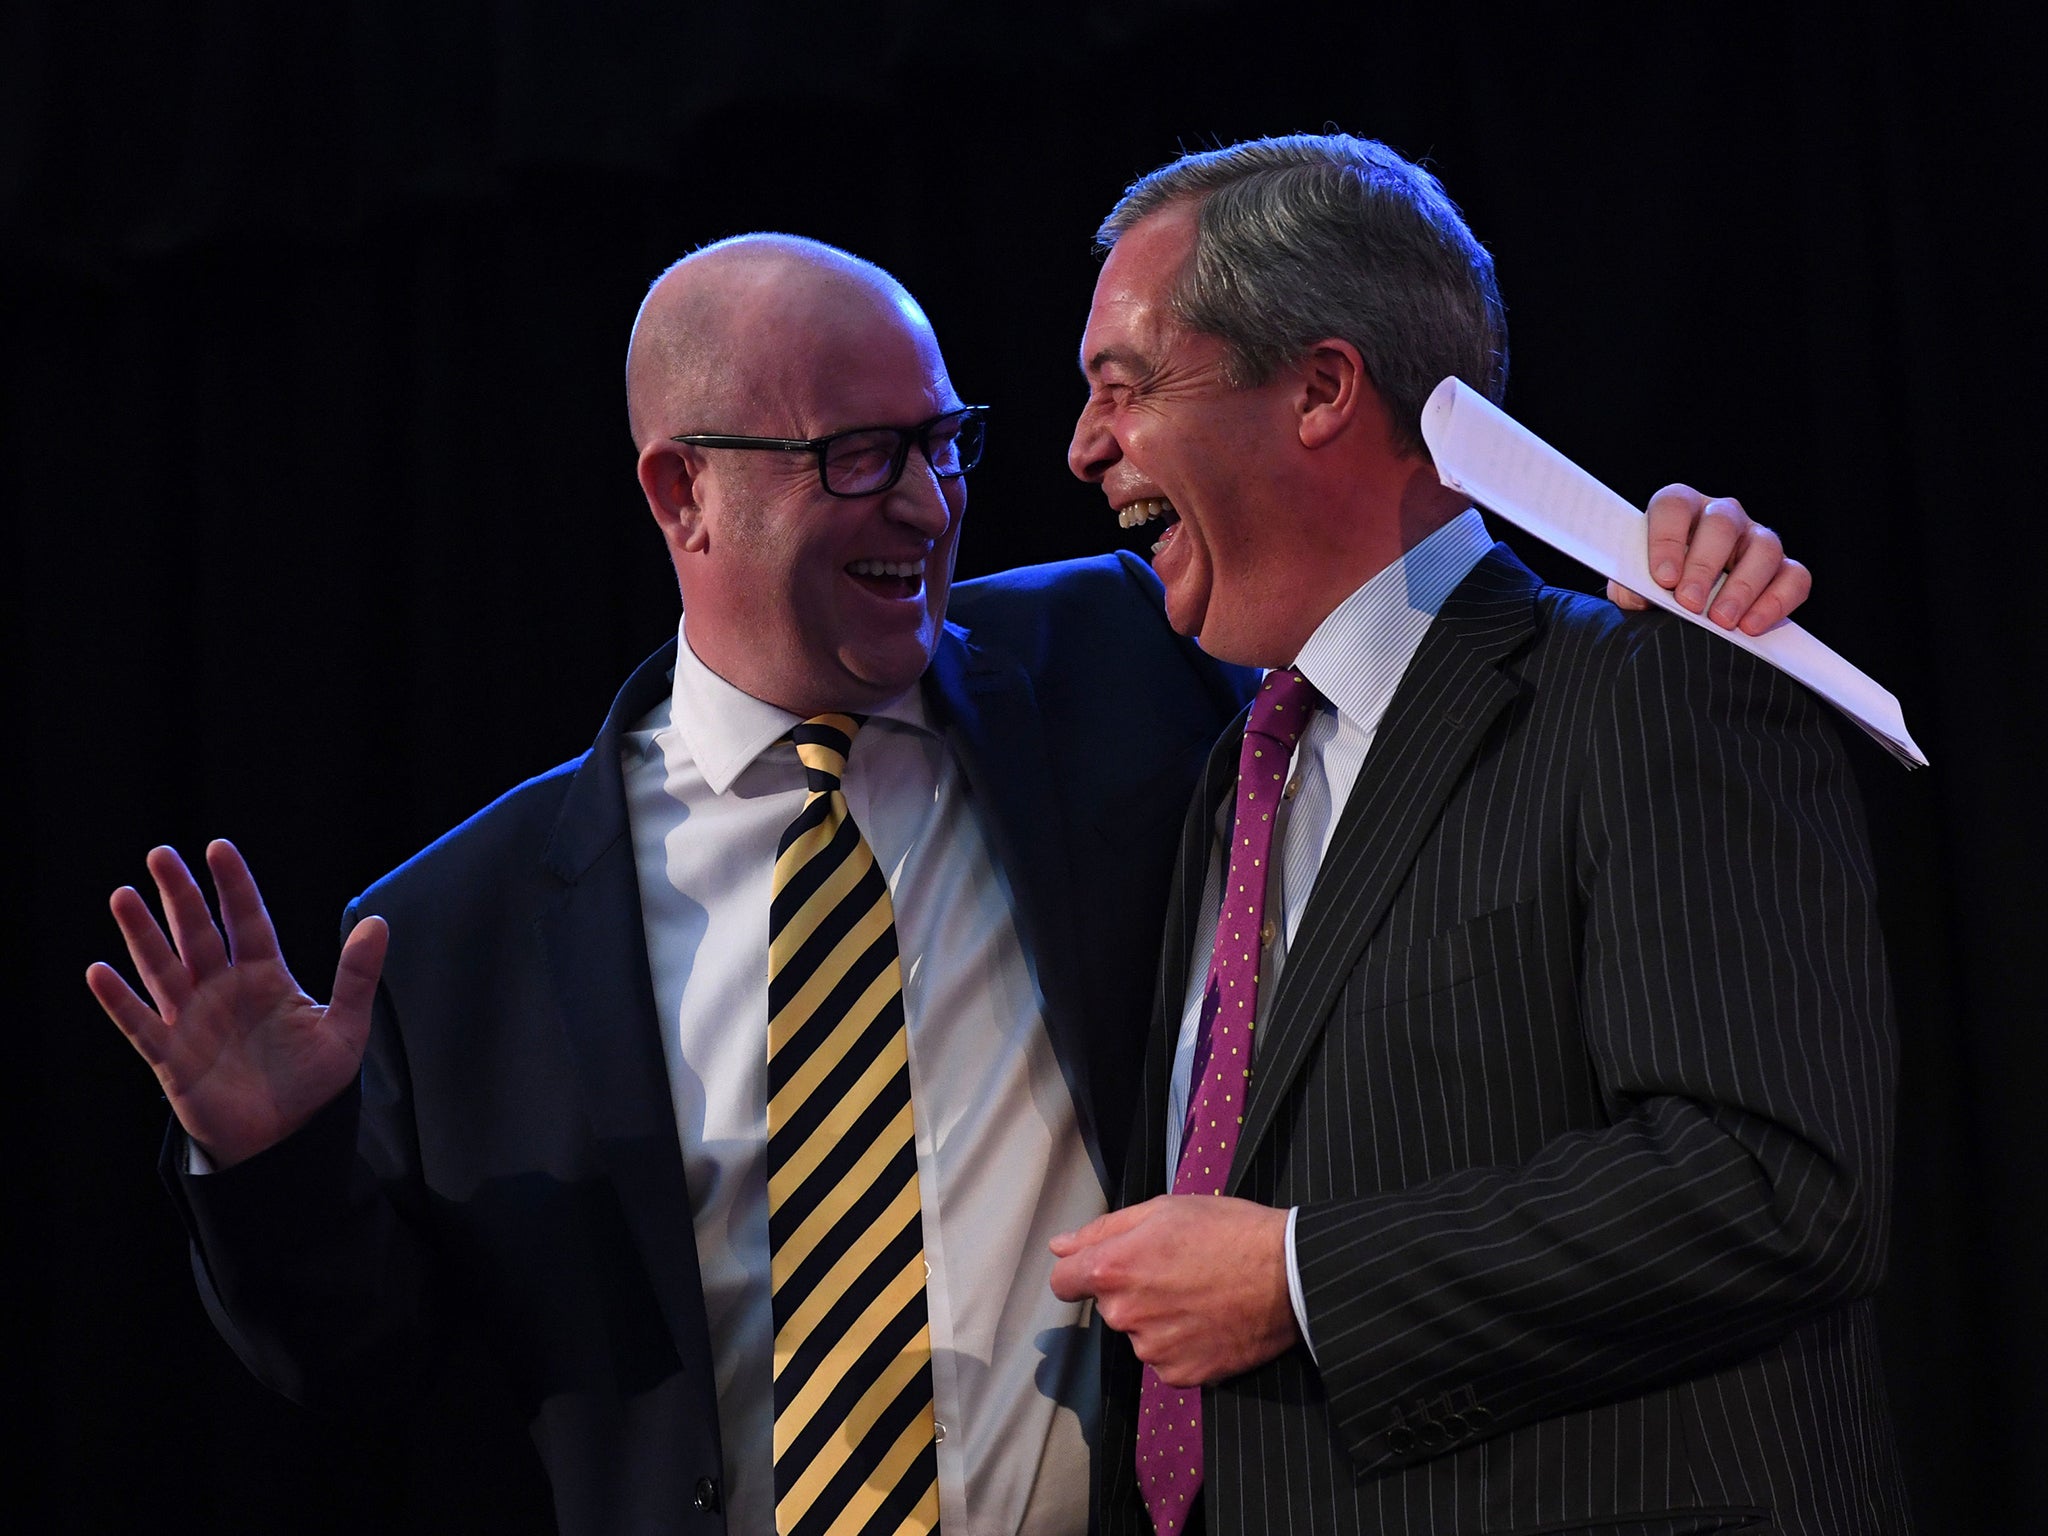 Paul Nuttall is congratulated by Nigel Farage after he was announced as the new Ukip leader